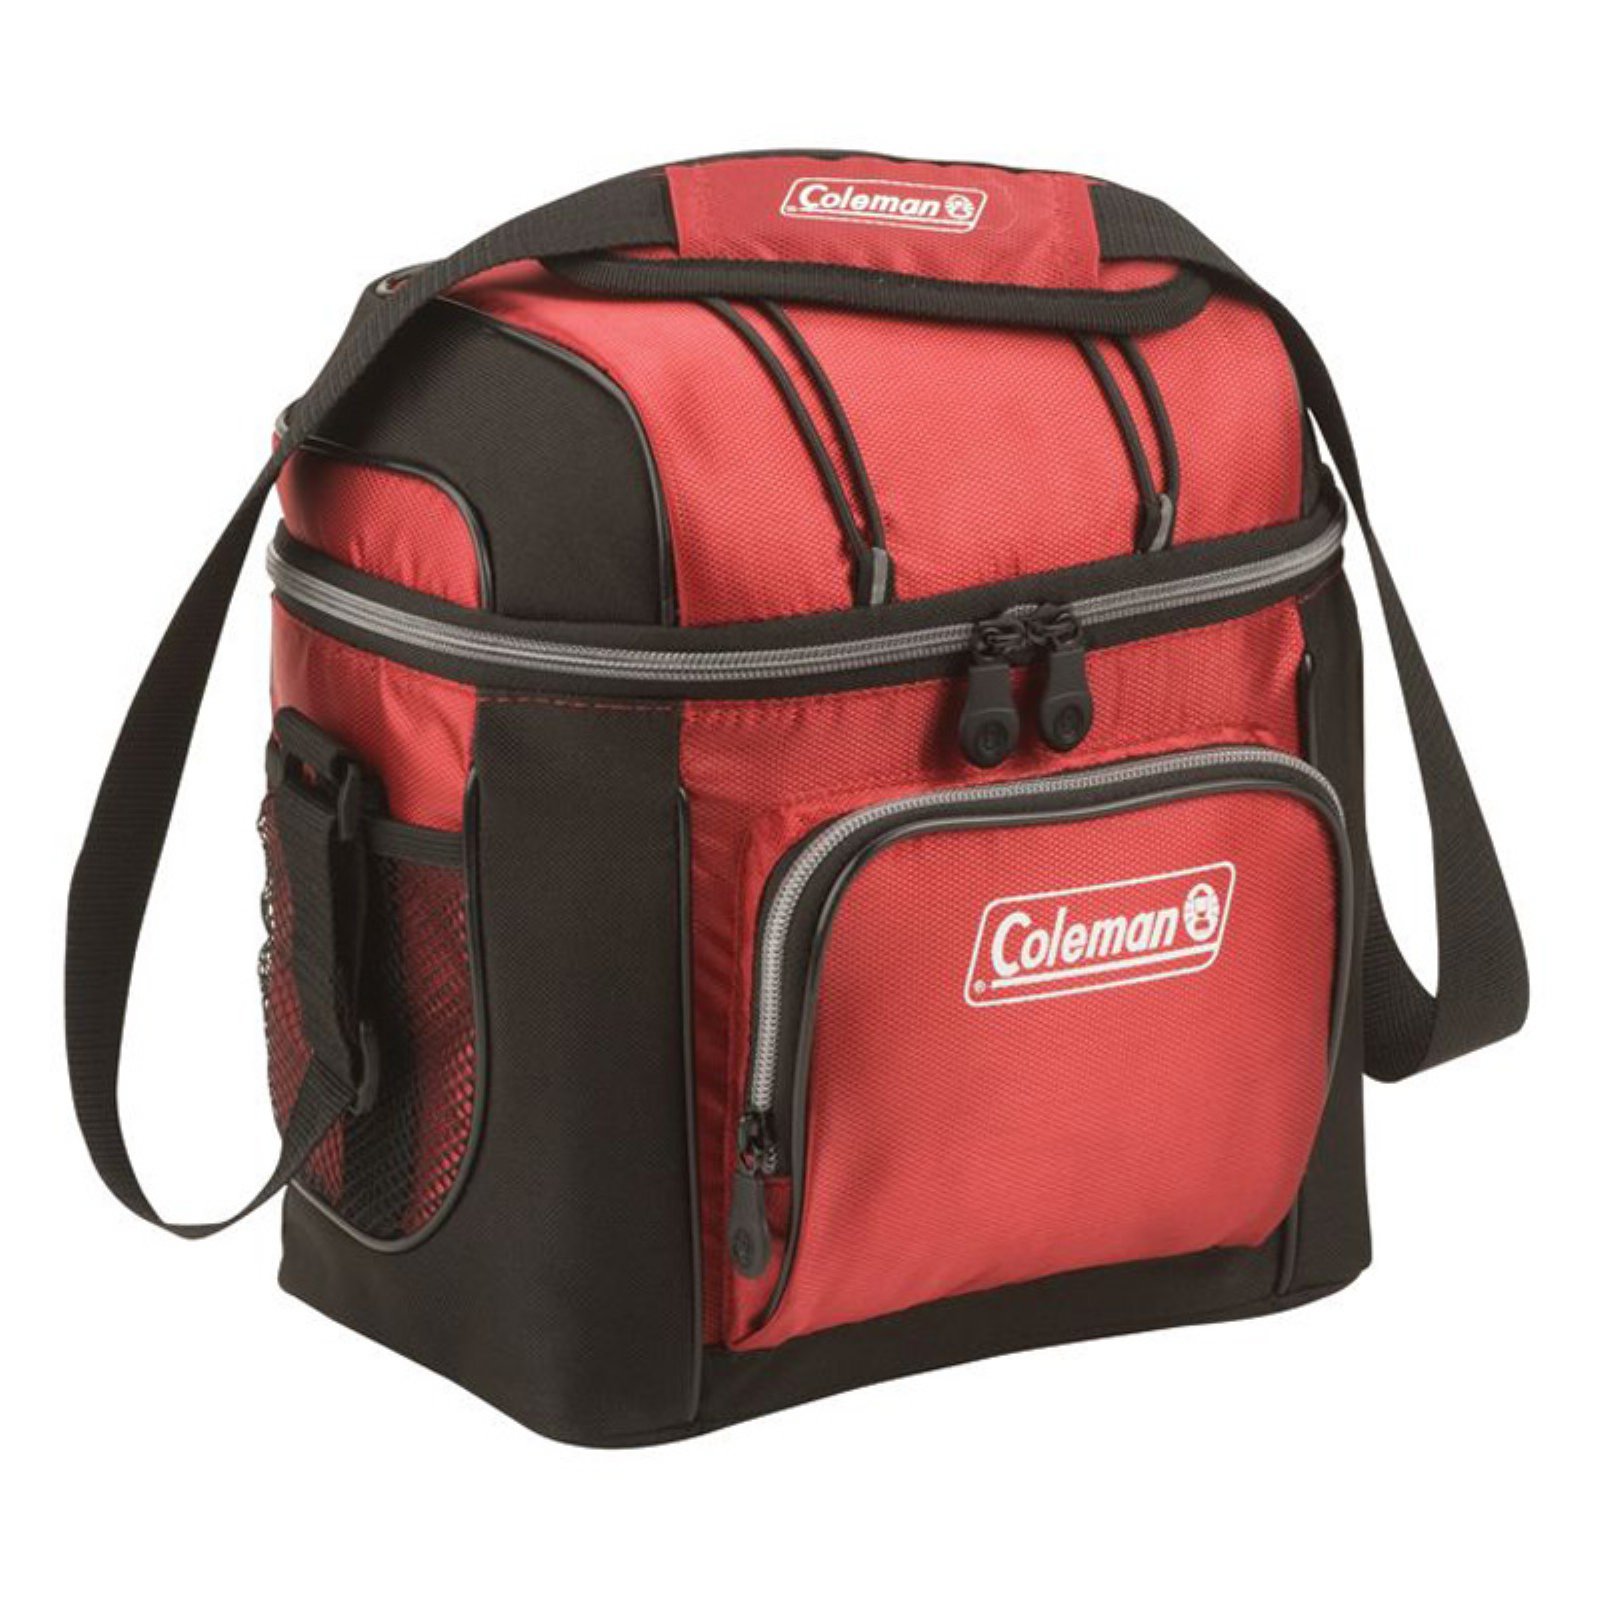 Coleman 9 Cans Soft-Sided Cooler, Red - image 1 of 5